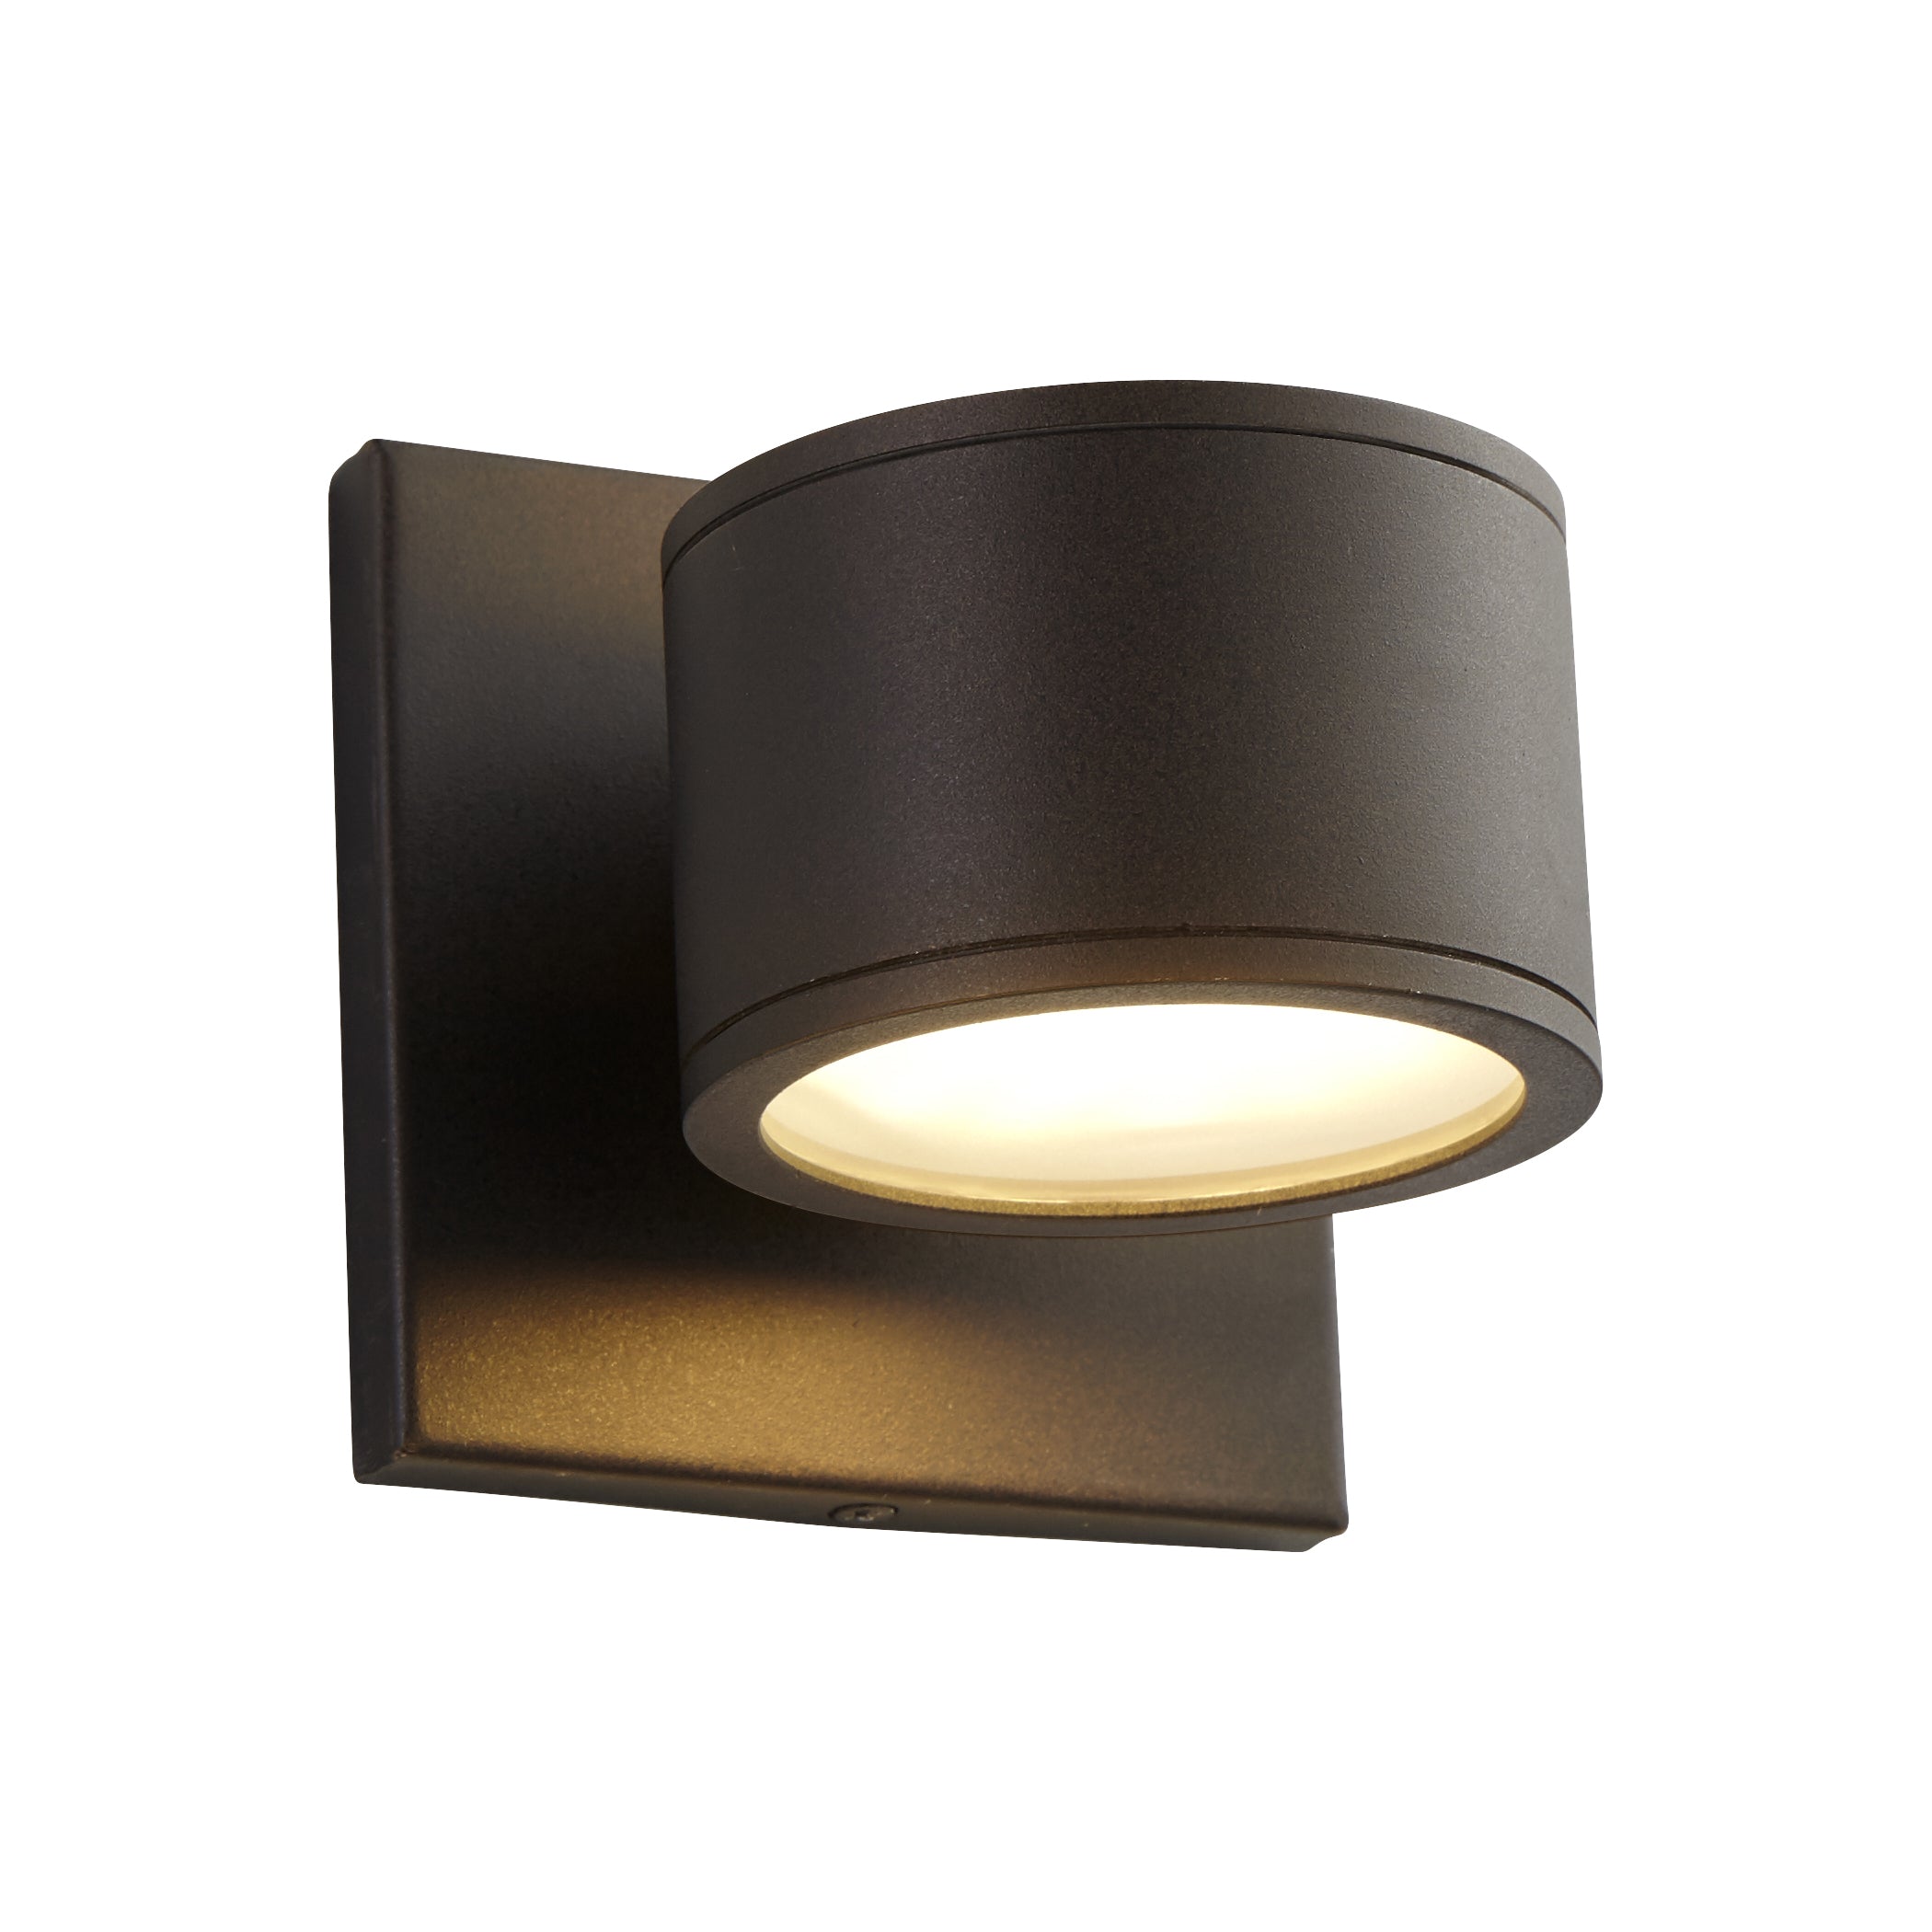 Oxygen Ceres 3-727-22 Outdoor Wall Sconce Light - Oiled Bronze